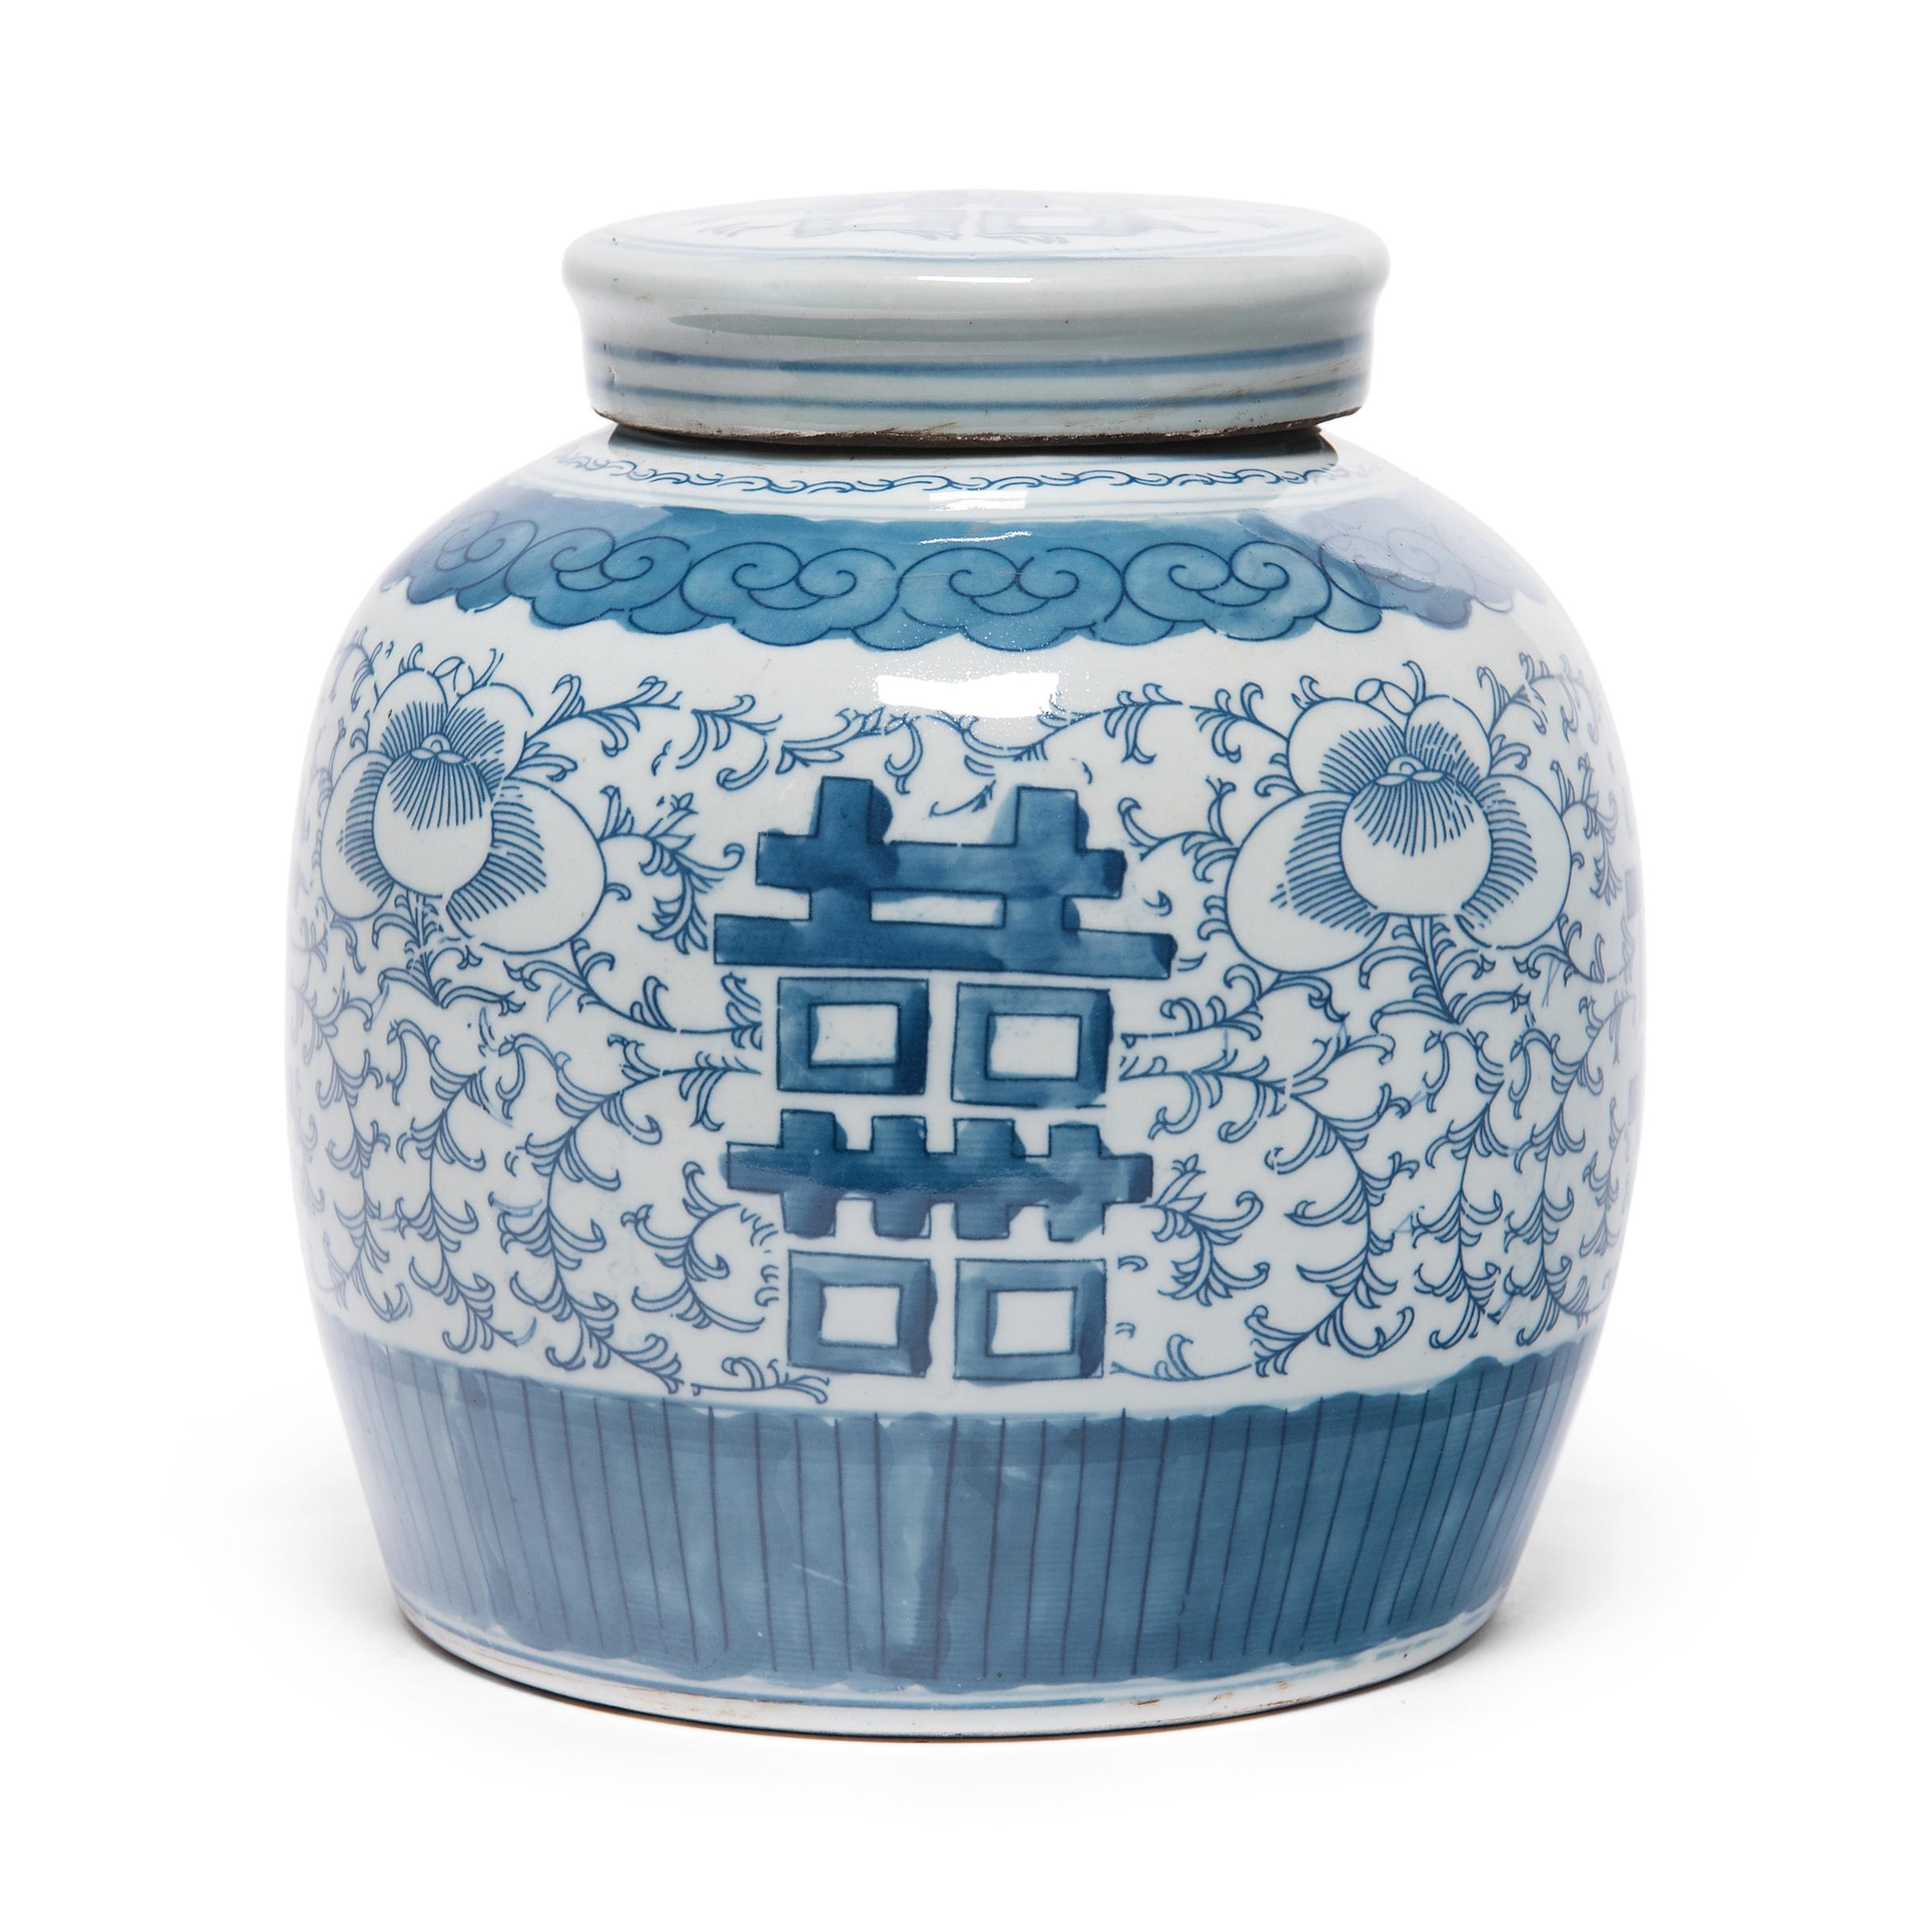 Glazed in the classic blue-and-white manner, this rounded jar offers a blessing of happiness and good fortune. Painted on either side of the jar is the symbol for 